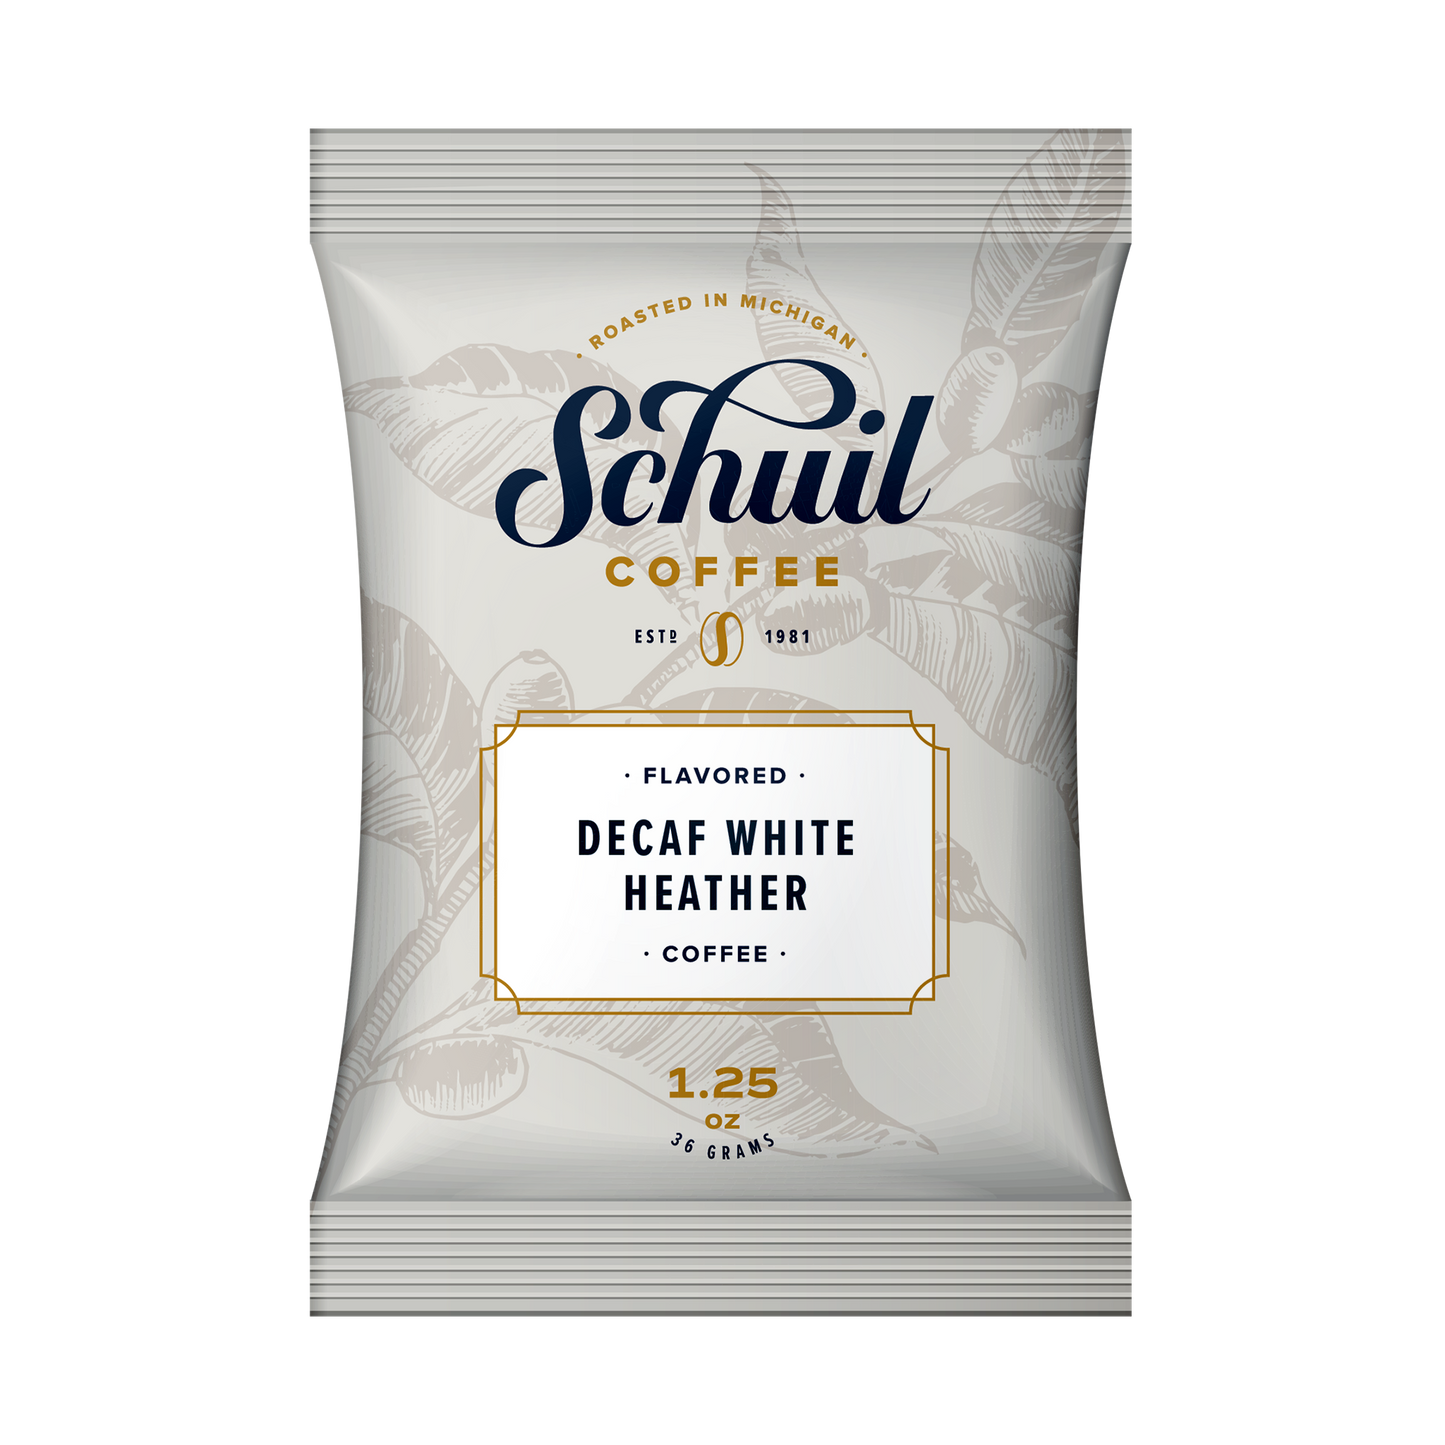 Decaf White Heather - Packet